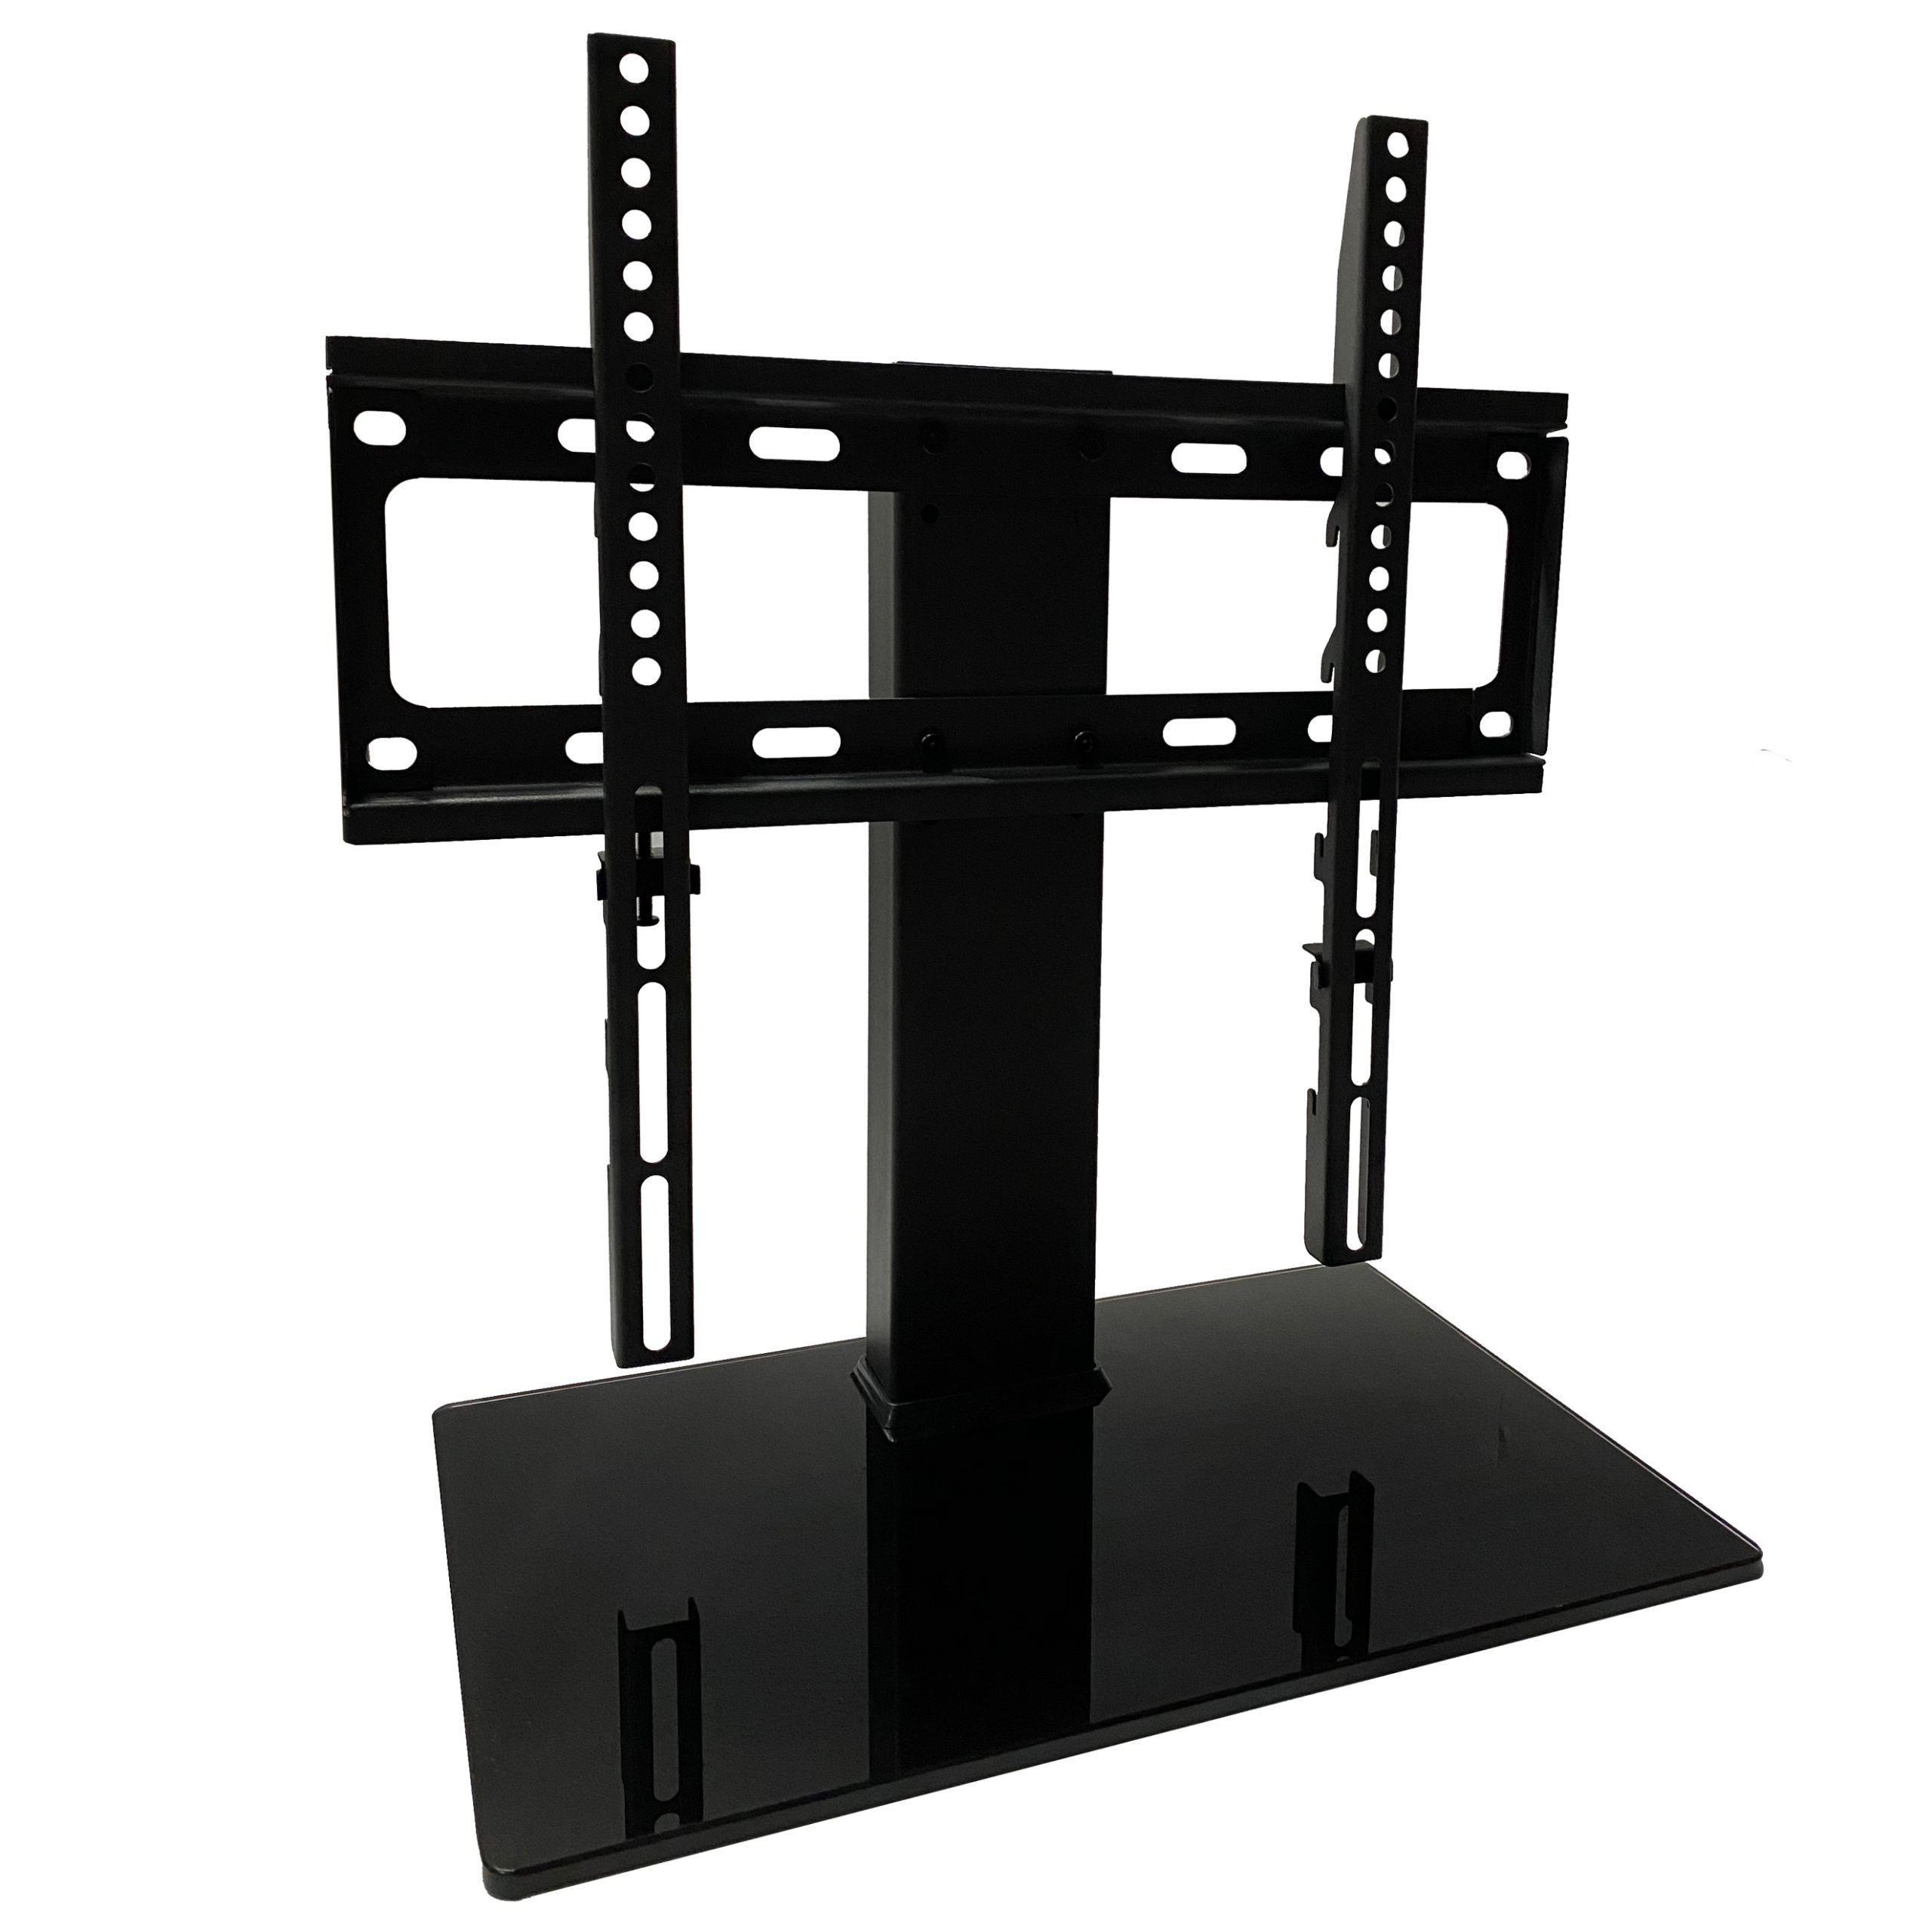 Tabletop Tv Stand Fit 26 55 Inch Tv | B&h Ergonomics Inside Tabletop Tv Stand (View 3 of 15)